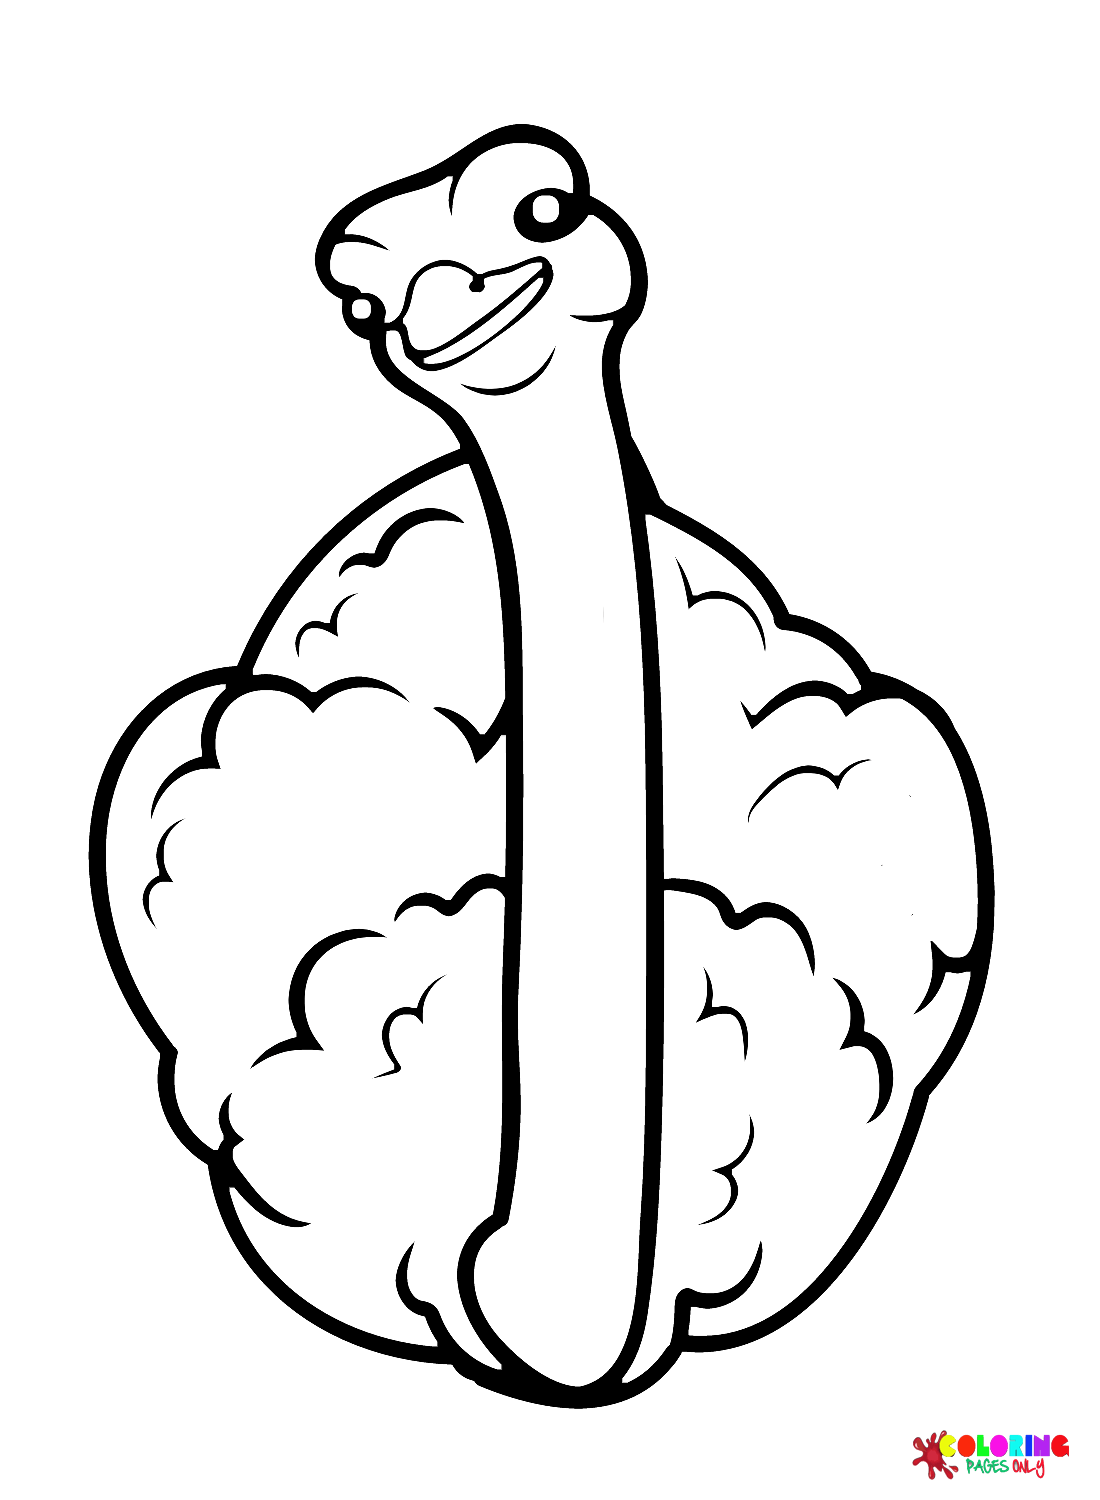 Adorable Ostrich from Ostrich